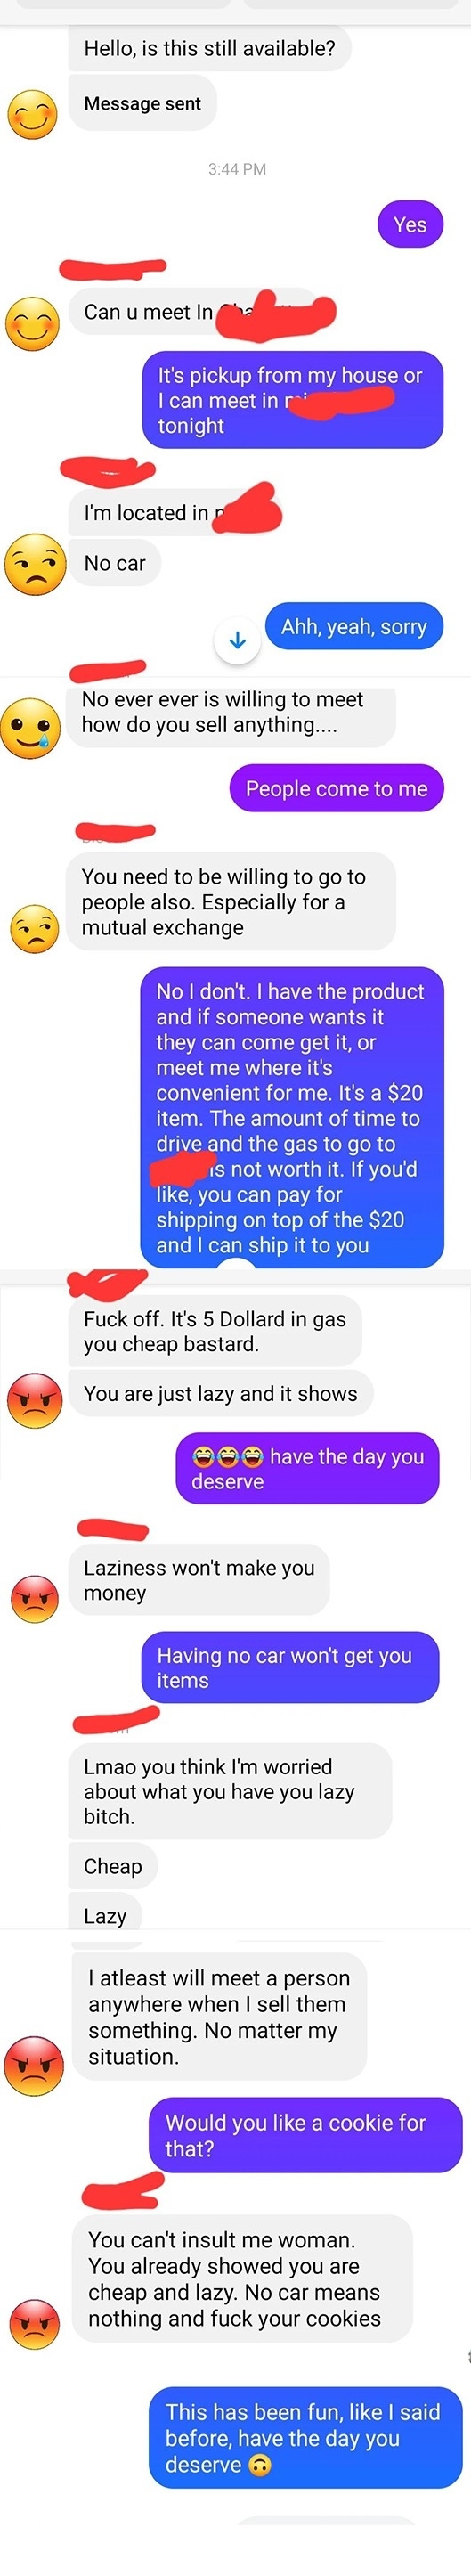 Text conversation showing a potential buyer upset because the seller cannot meet up due to having no car. The buyer uses harsh language and insults